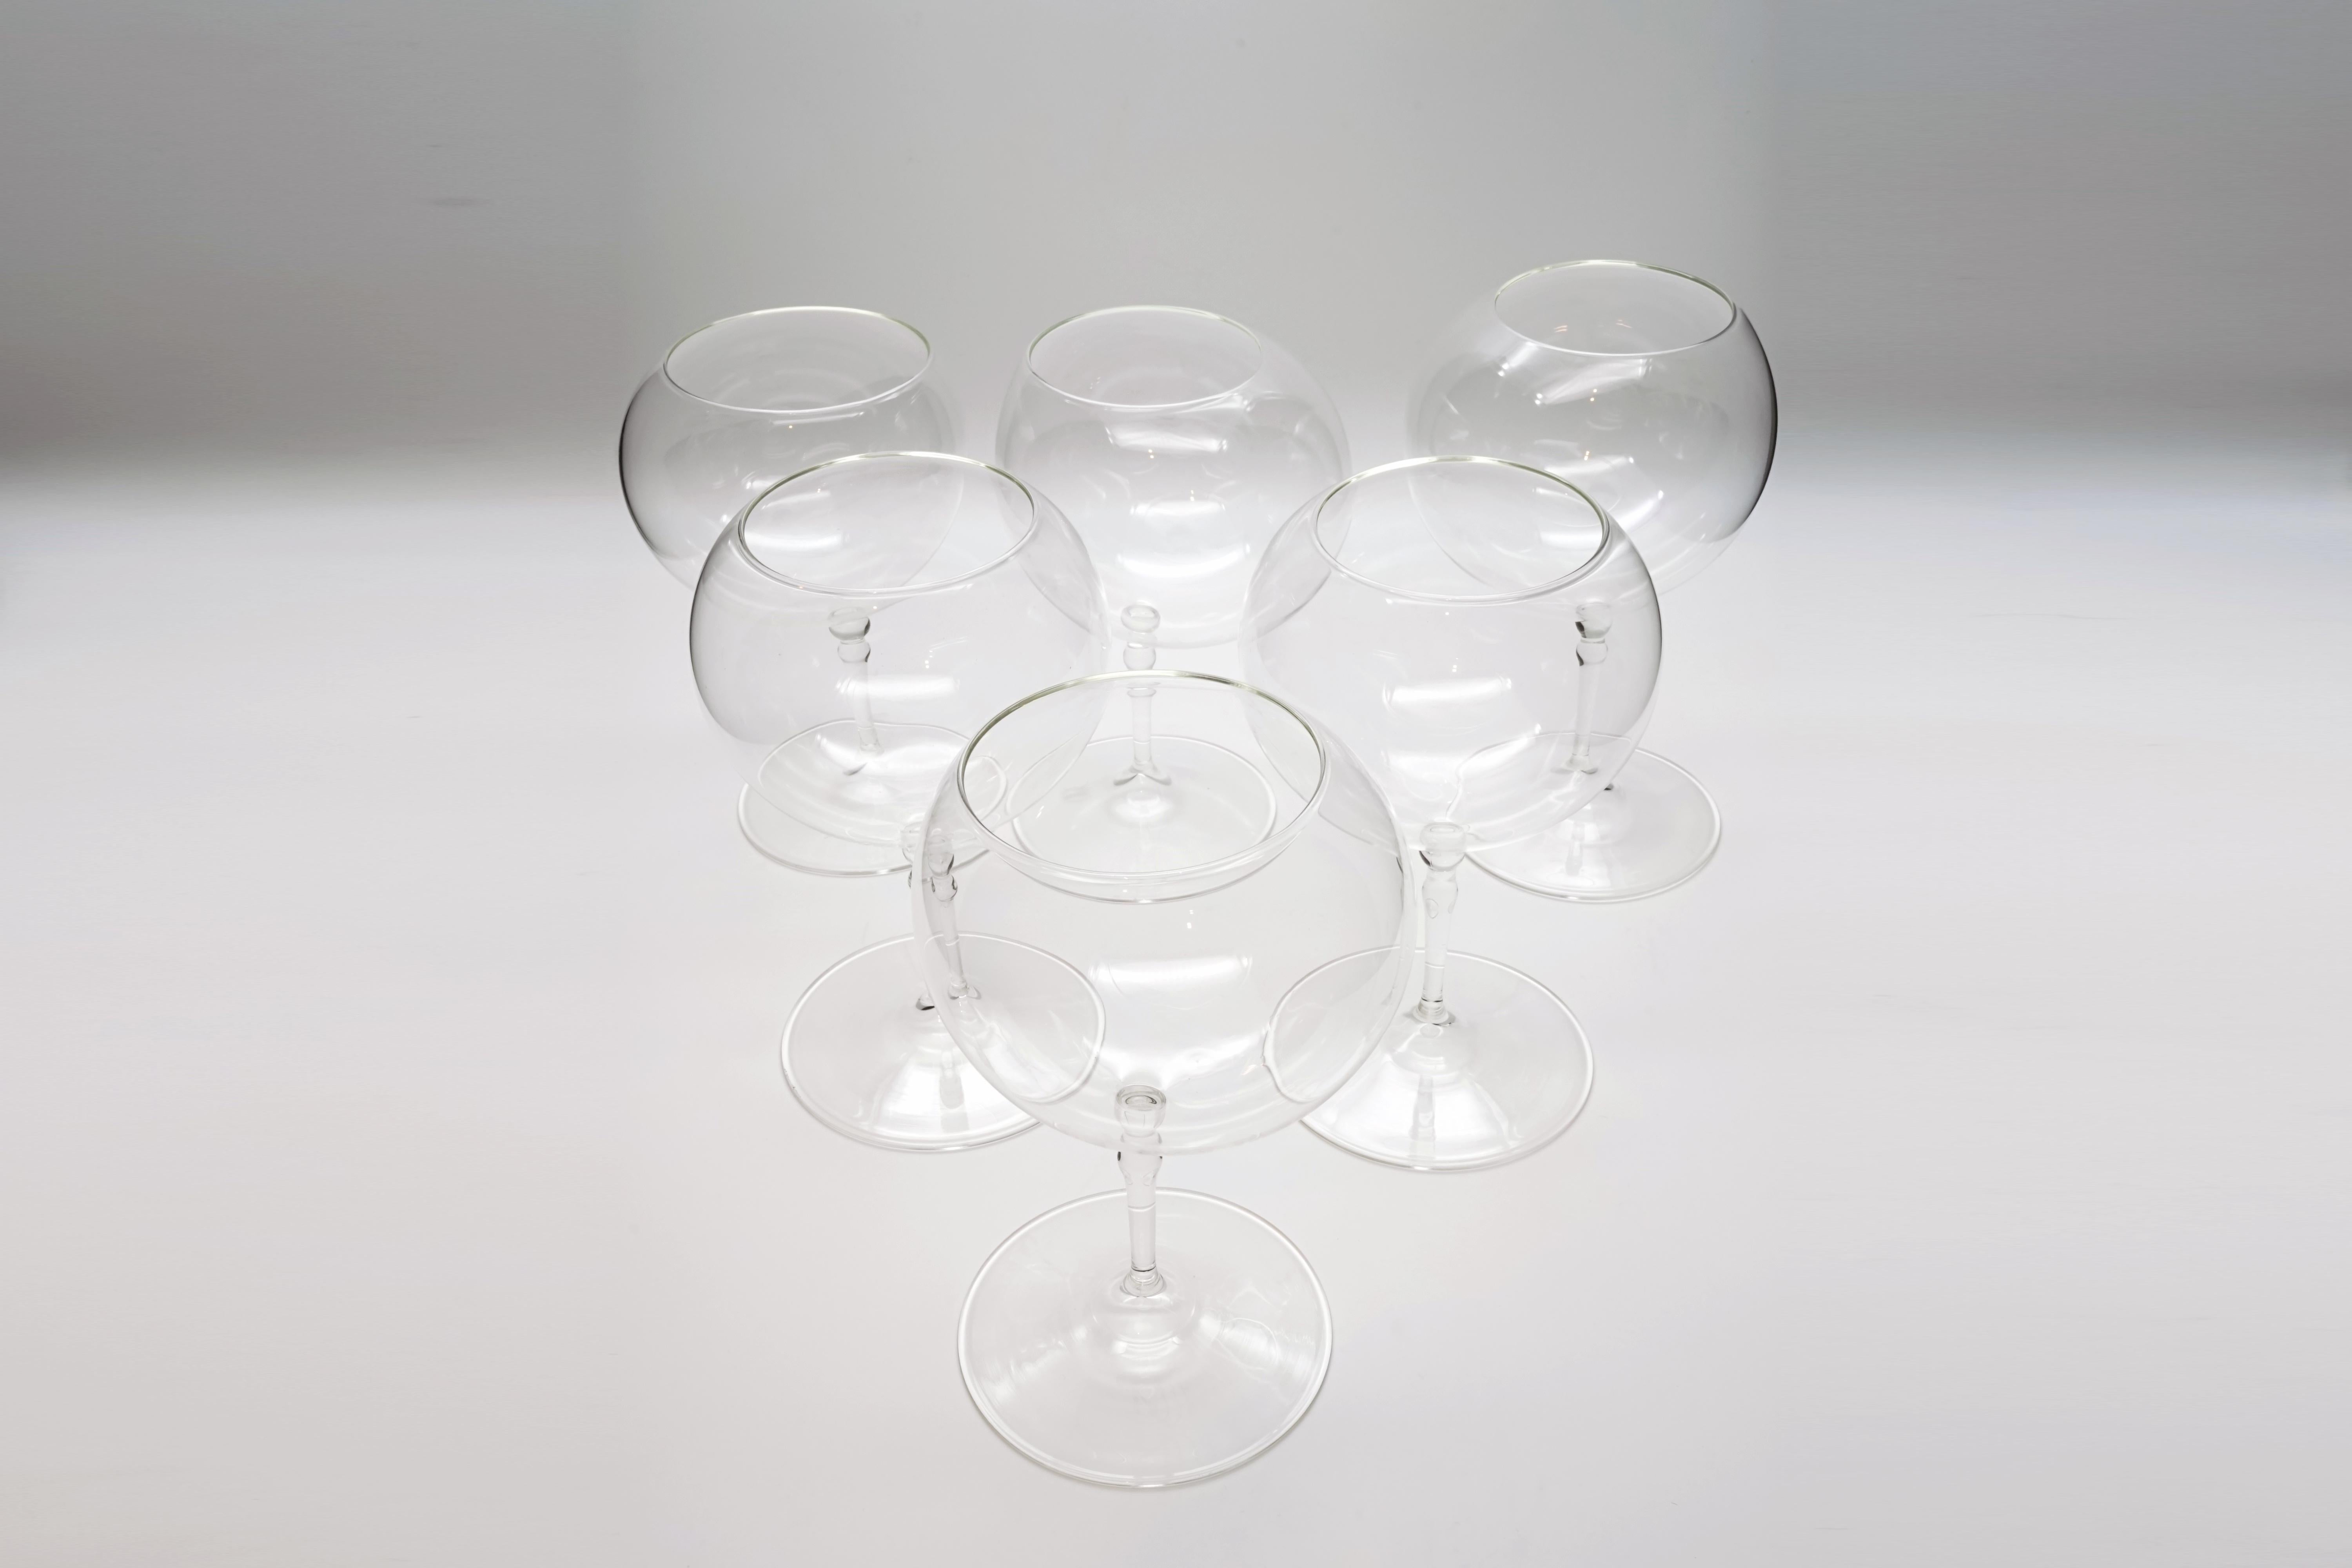 The materiality, in the case of a standardized object such as a wine glass, becomes a significant challenge. Precisely for this reason the Kanz wanted to work denying the typical industrial processing of borosilicate glass, choosing to pursue the